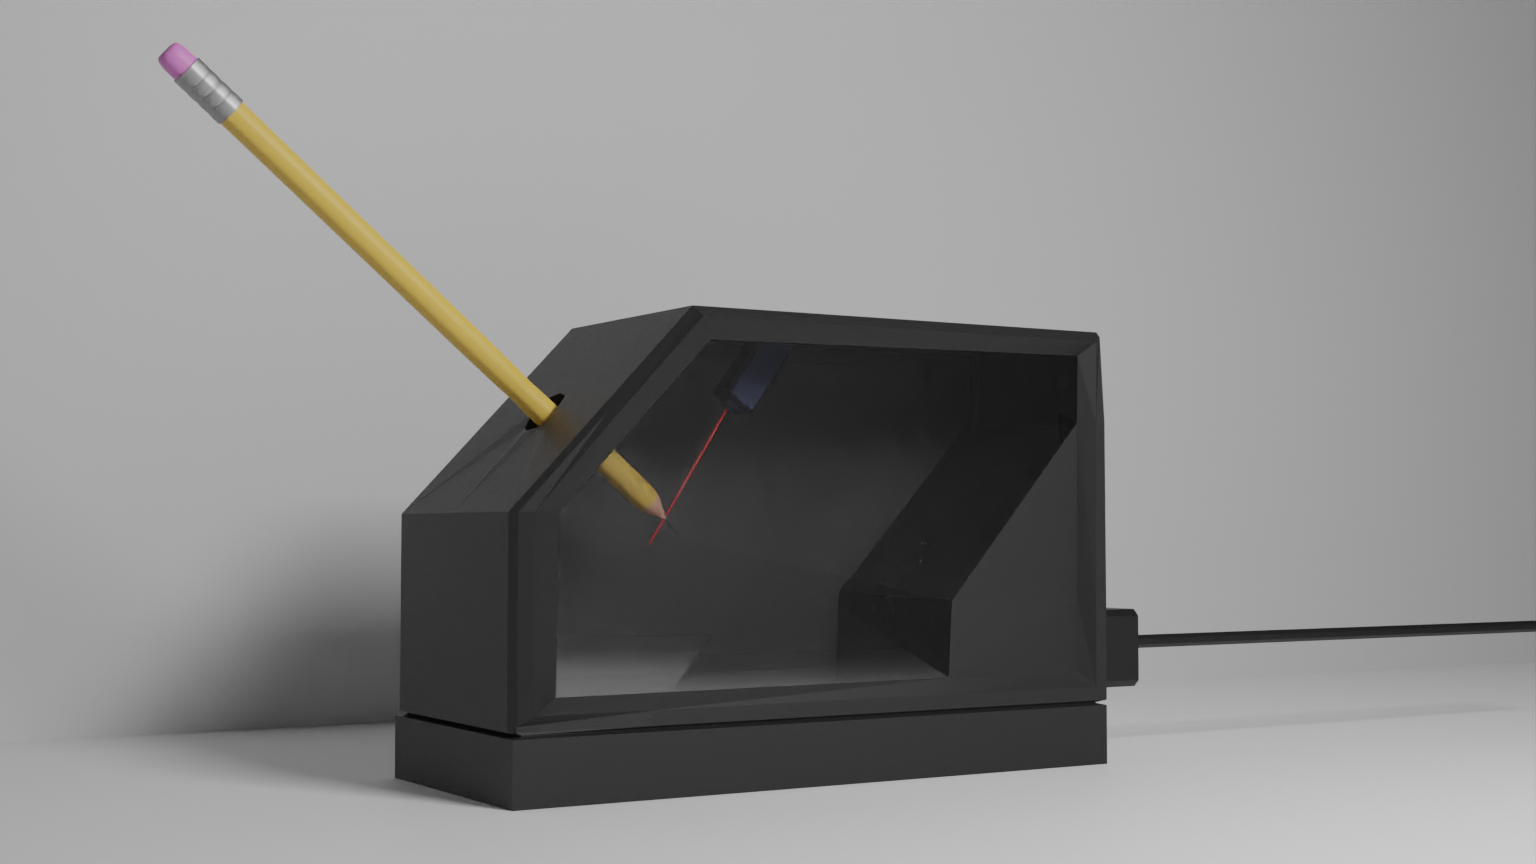 A 3D render of the pencil sharpener in action.